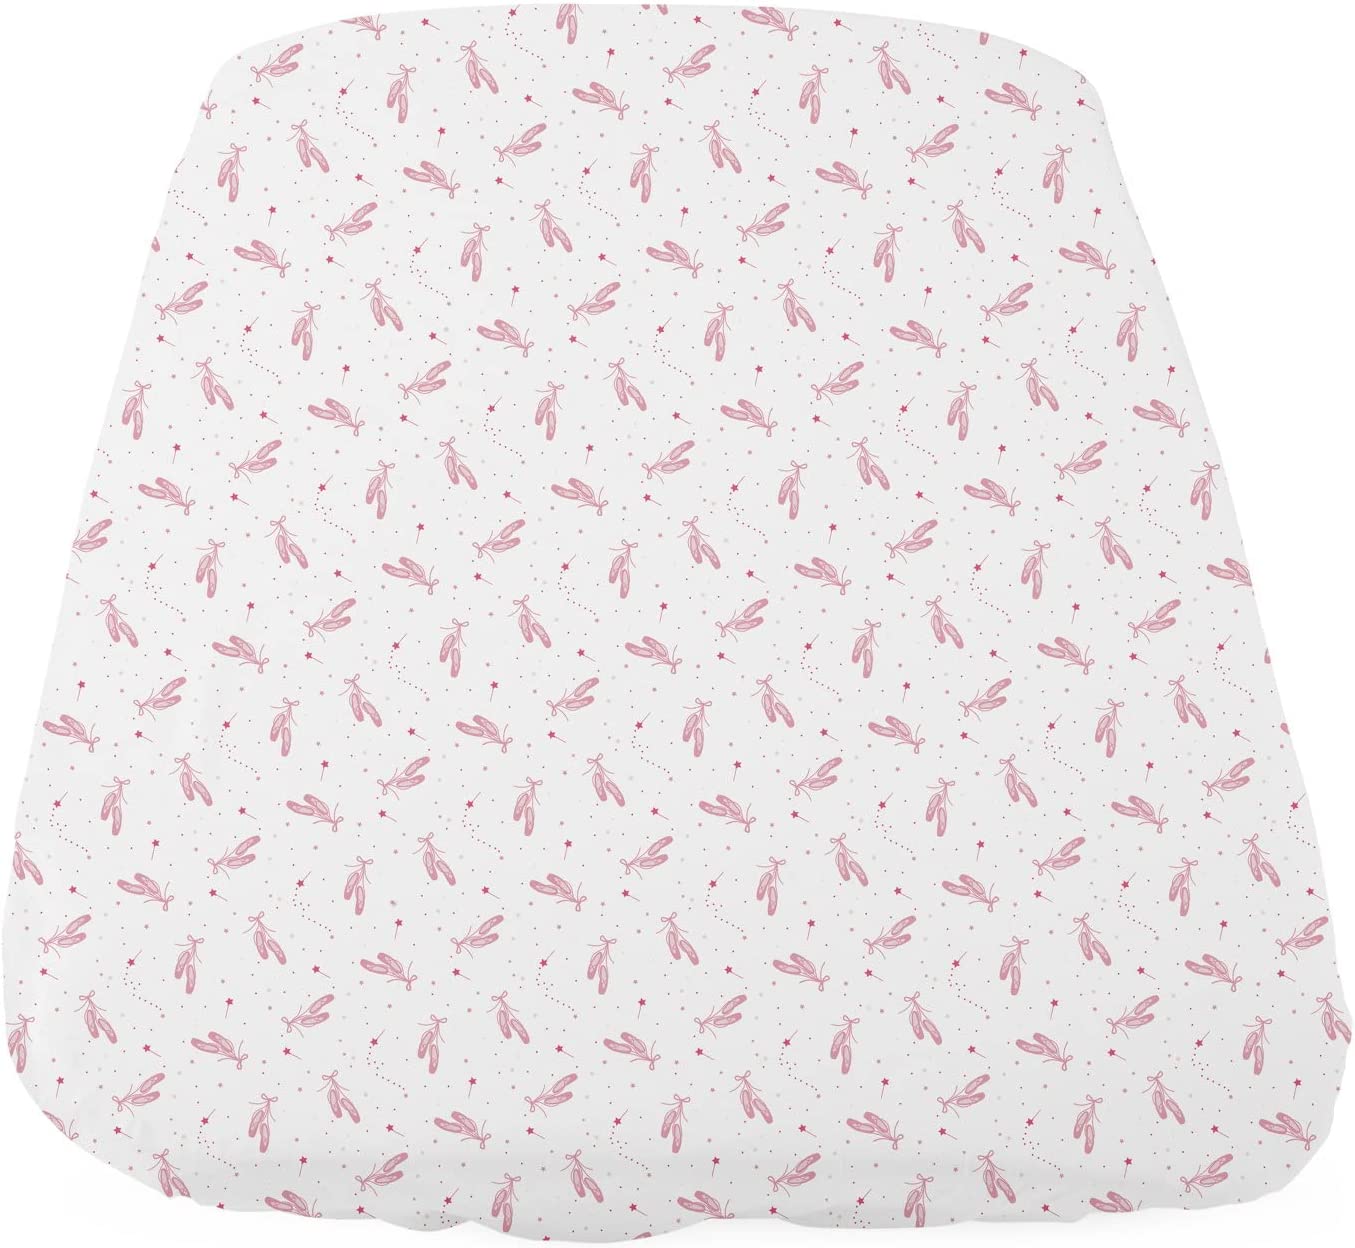 Chicco Fitted Sheets 2 Piece Set For Next2Me Forever, Pink Ballet